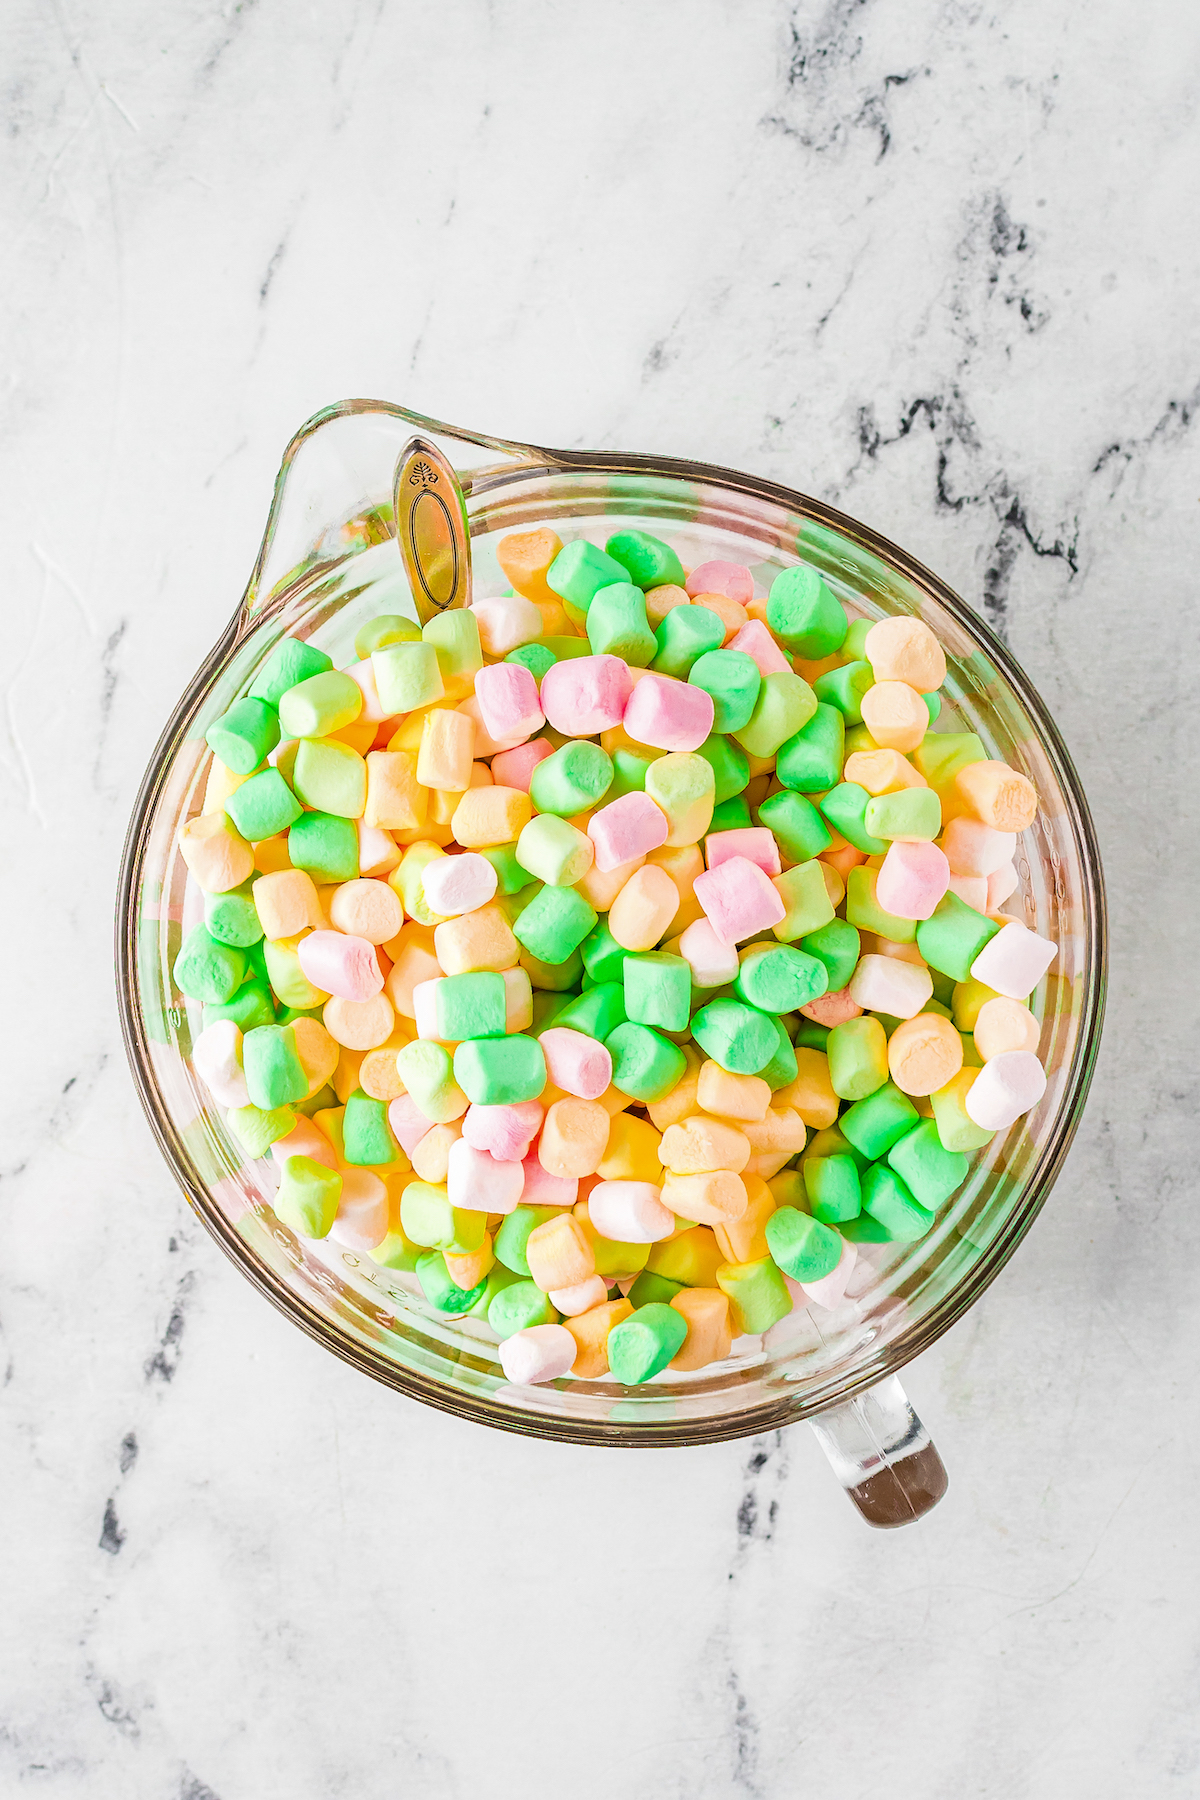 Colored marshmallows in a mixing bowl.